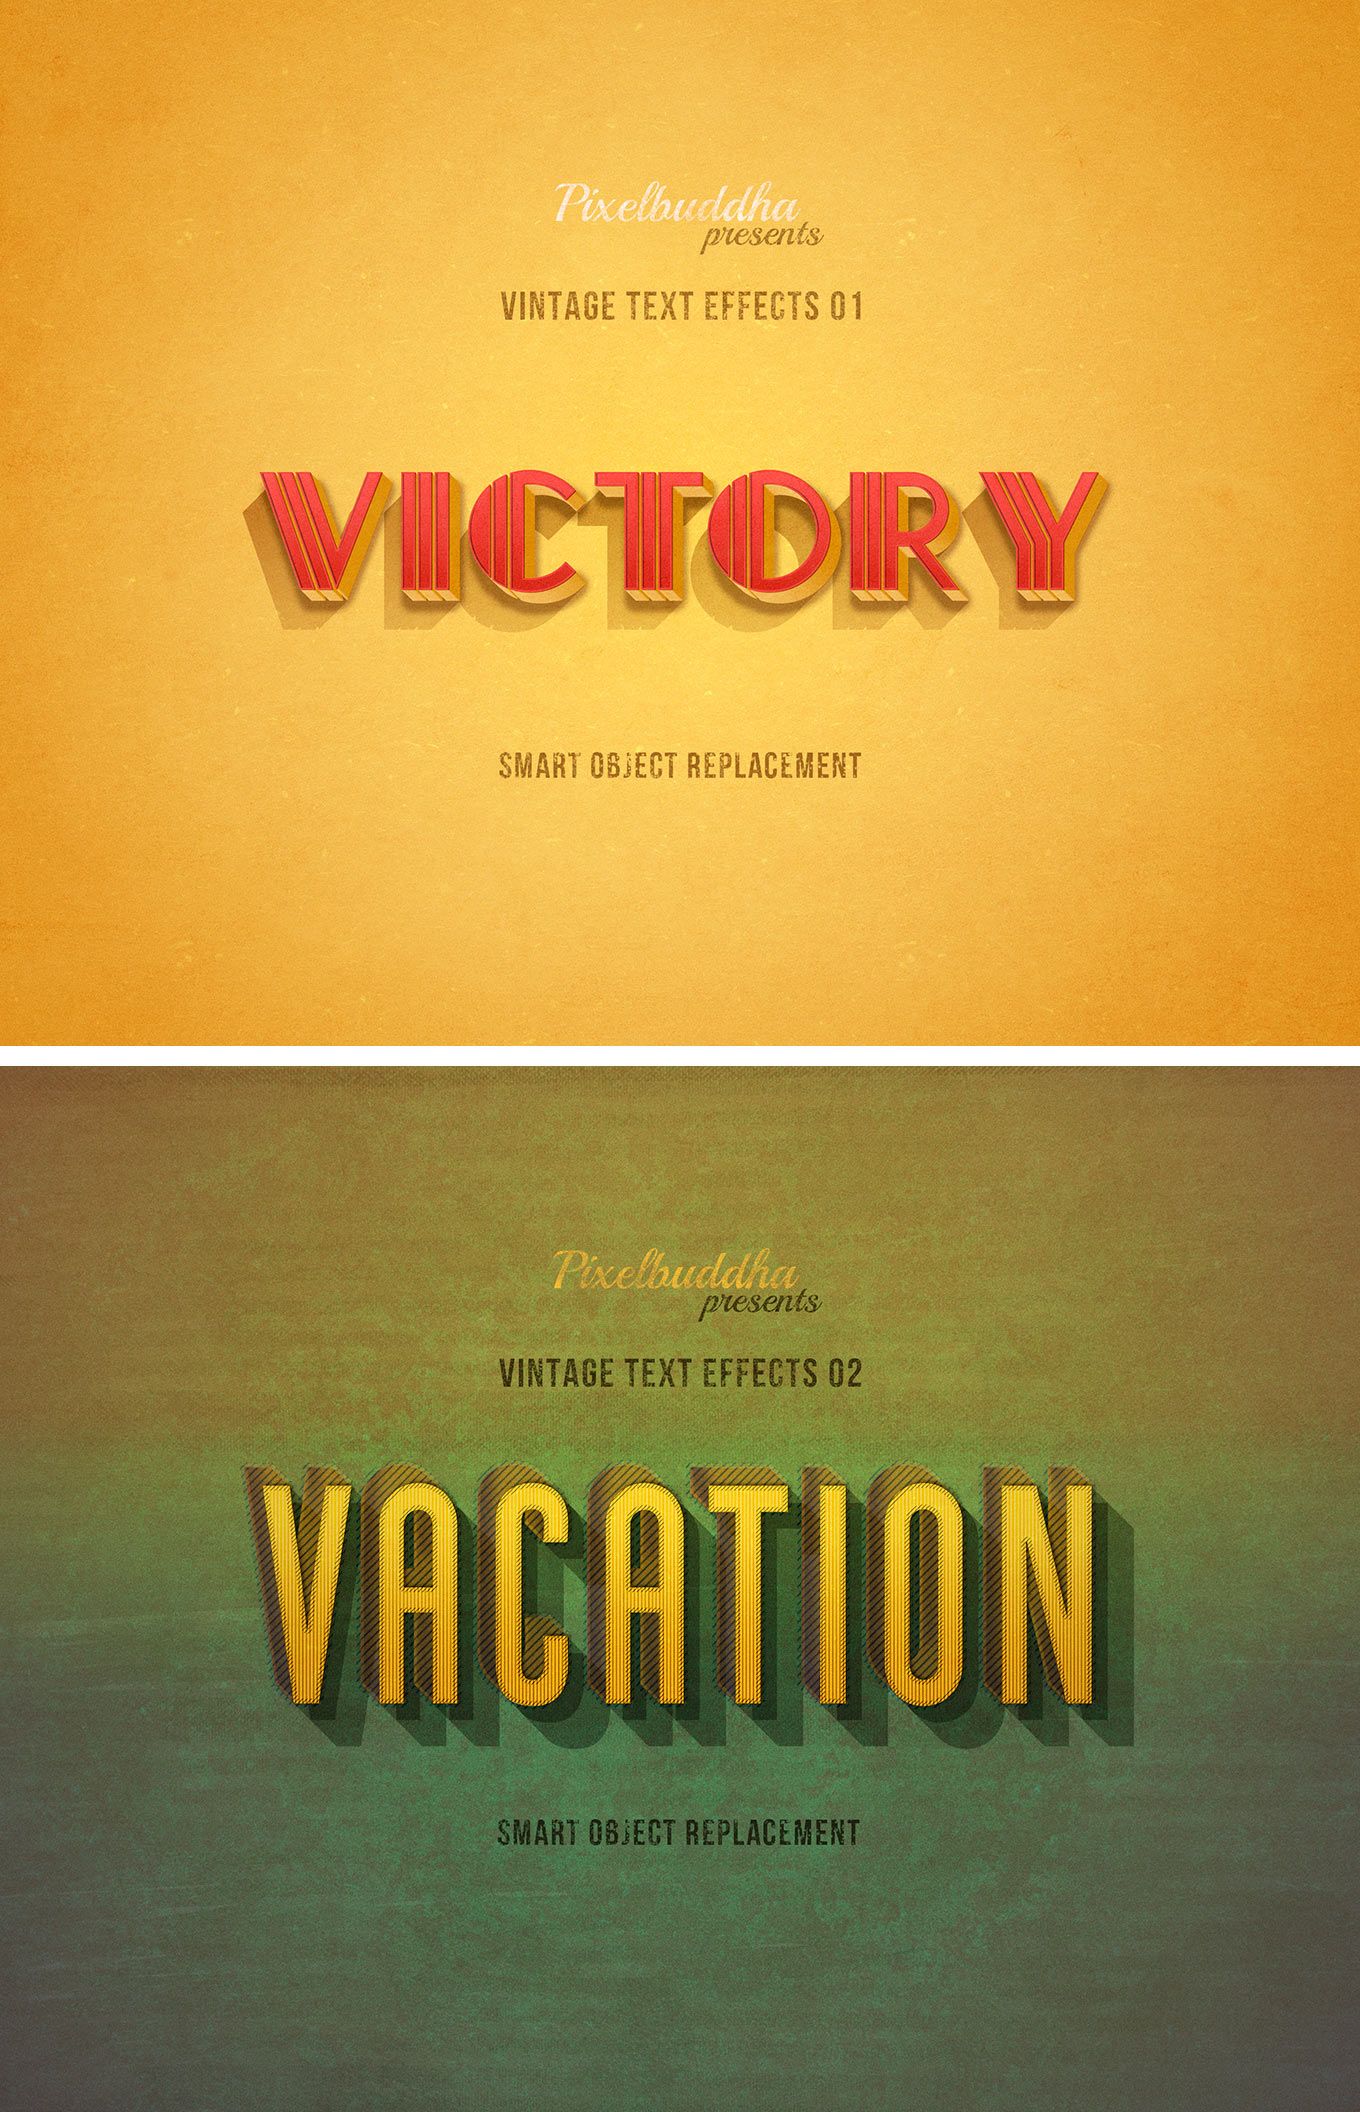 vector text effects illustrator free download